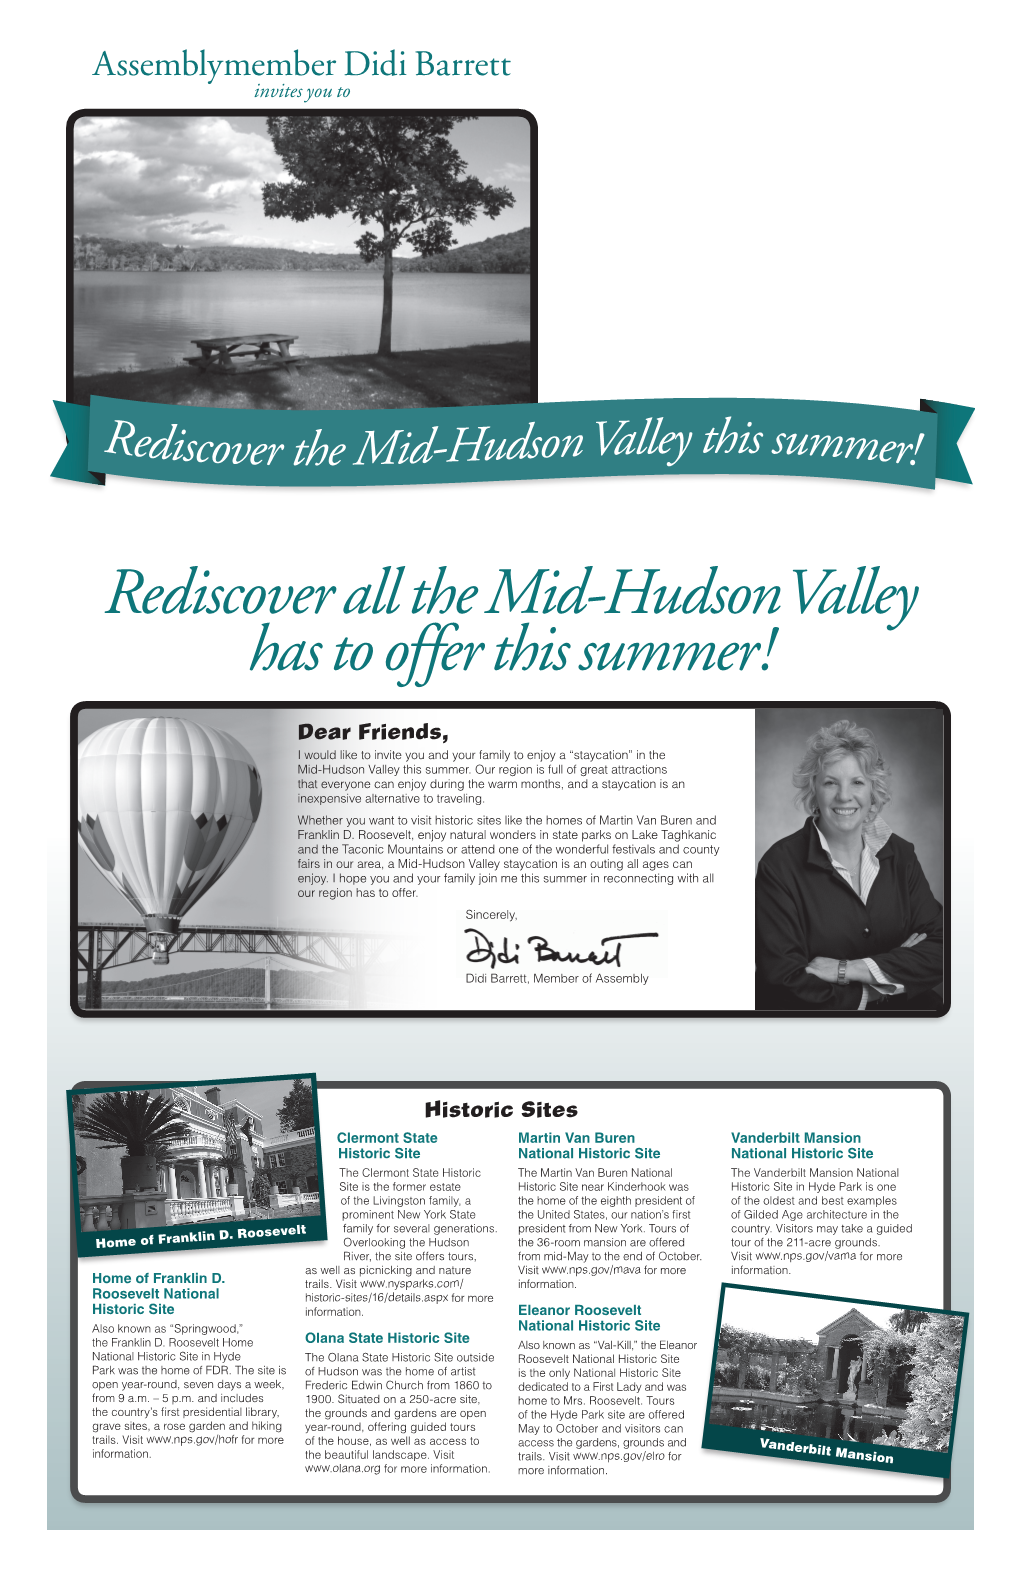 Rediscover All the Mid-Hudson Valley Has to Offer This Summer!